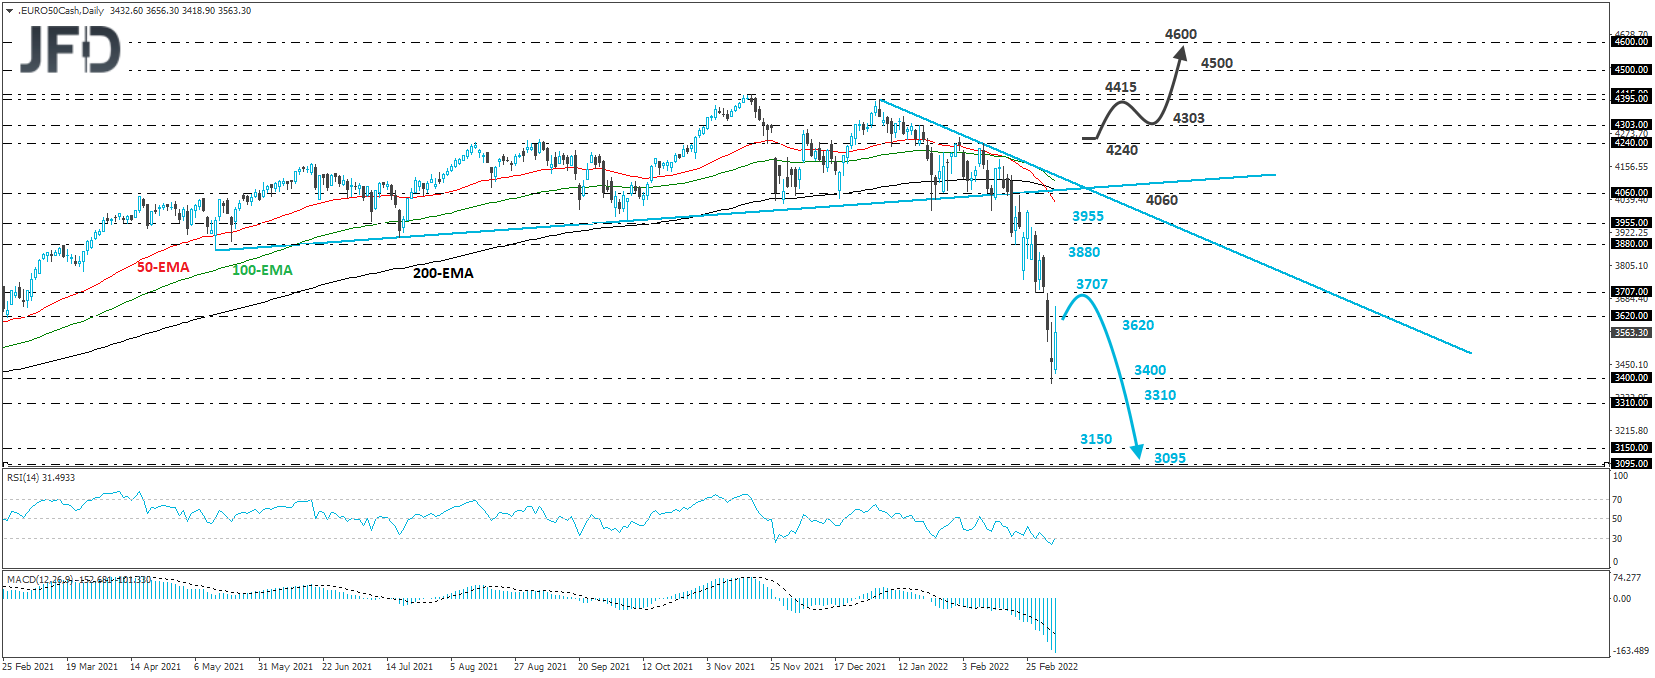 Euro Stoxx 50 cash index daily chart technical analysis